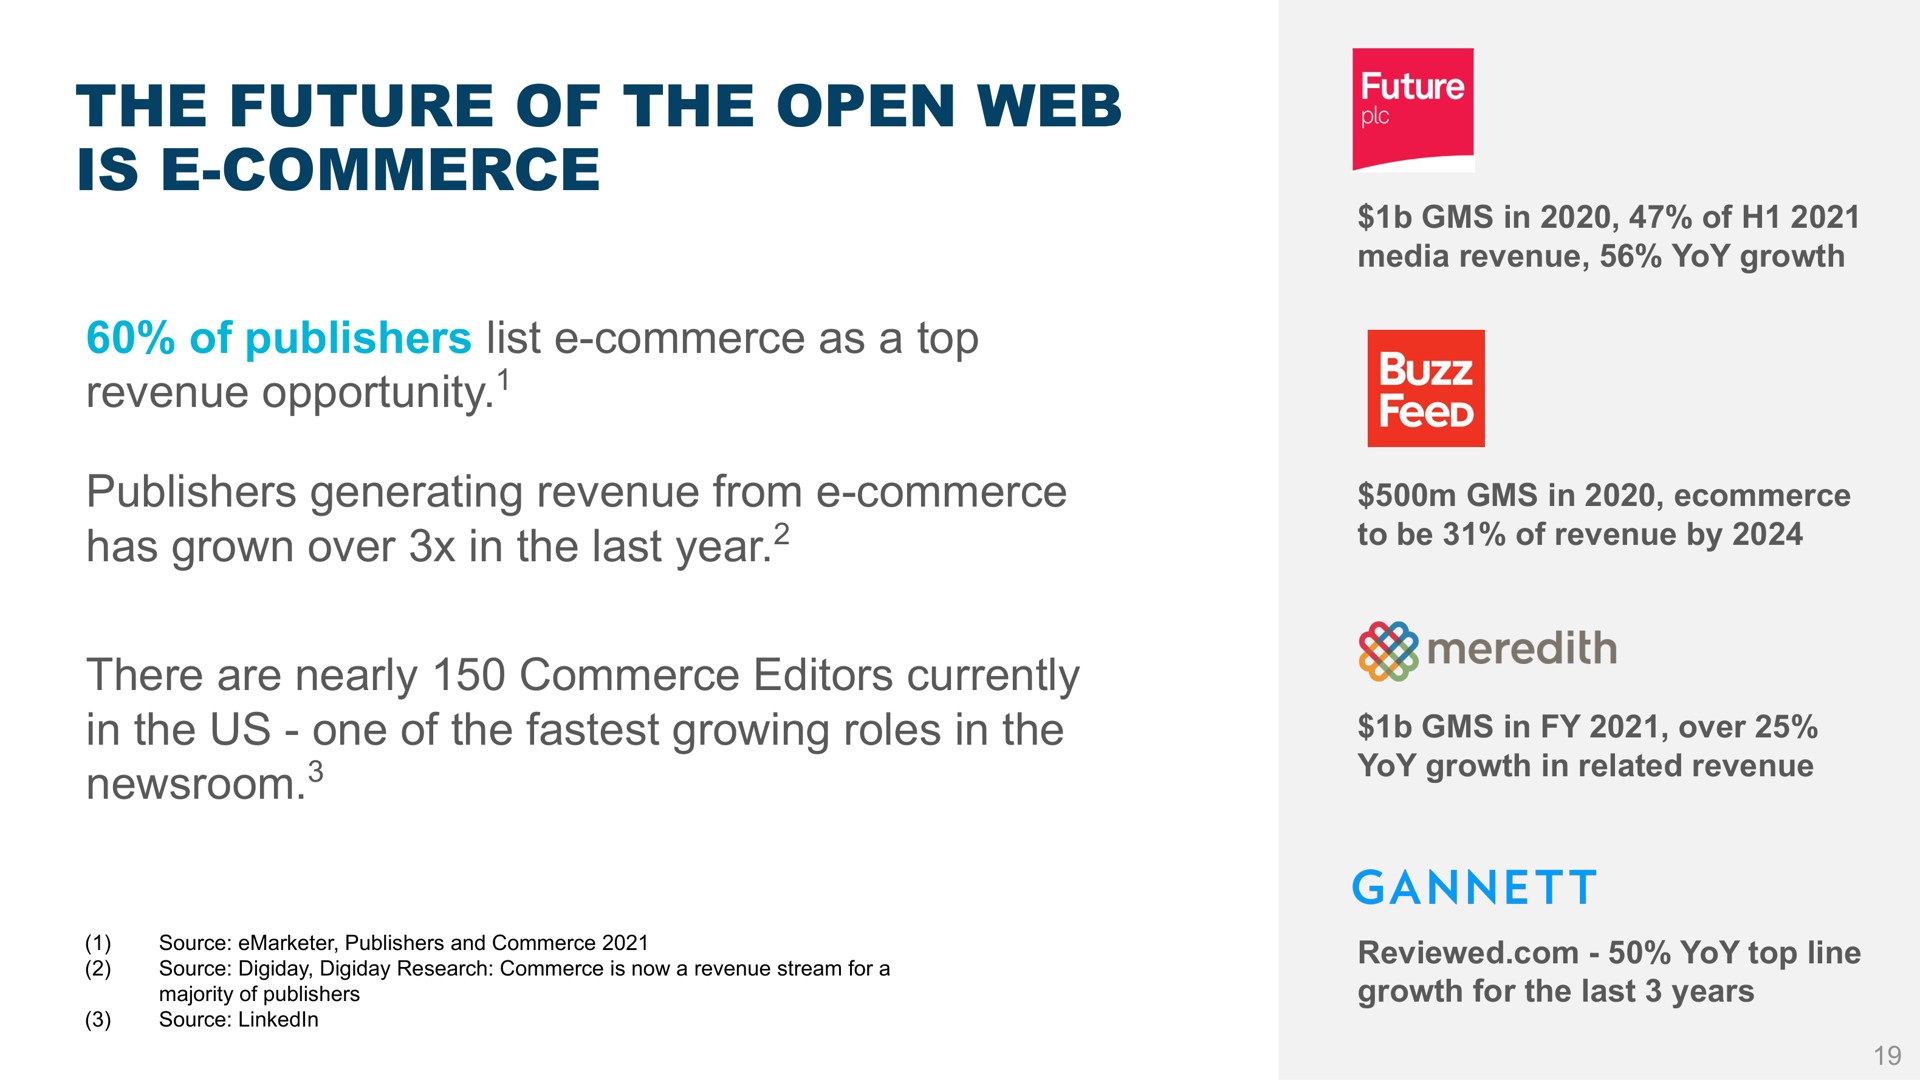 the future of the open web is commerce | Taboola